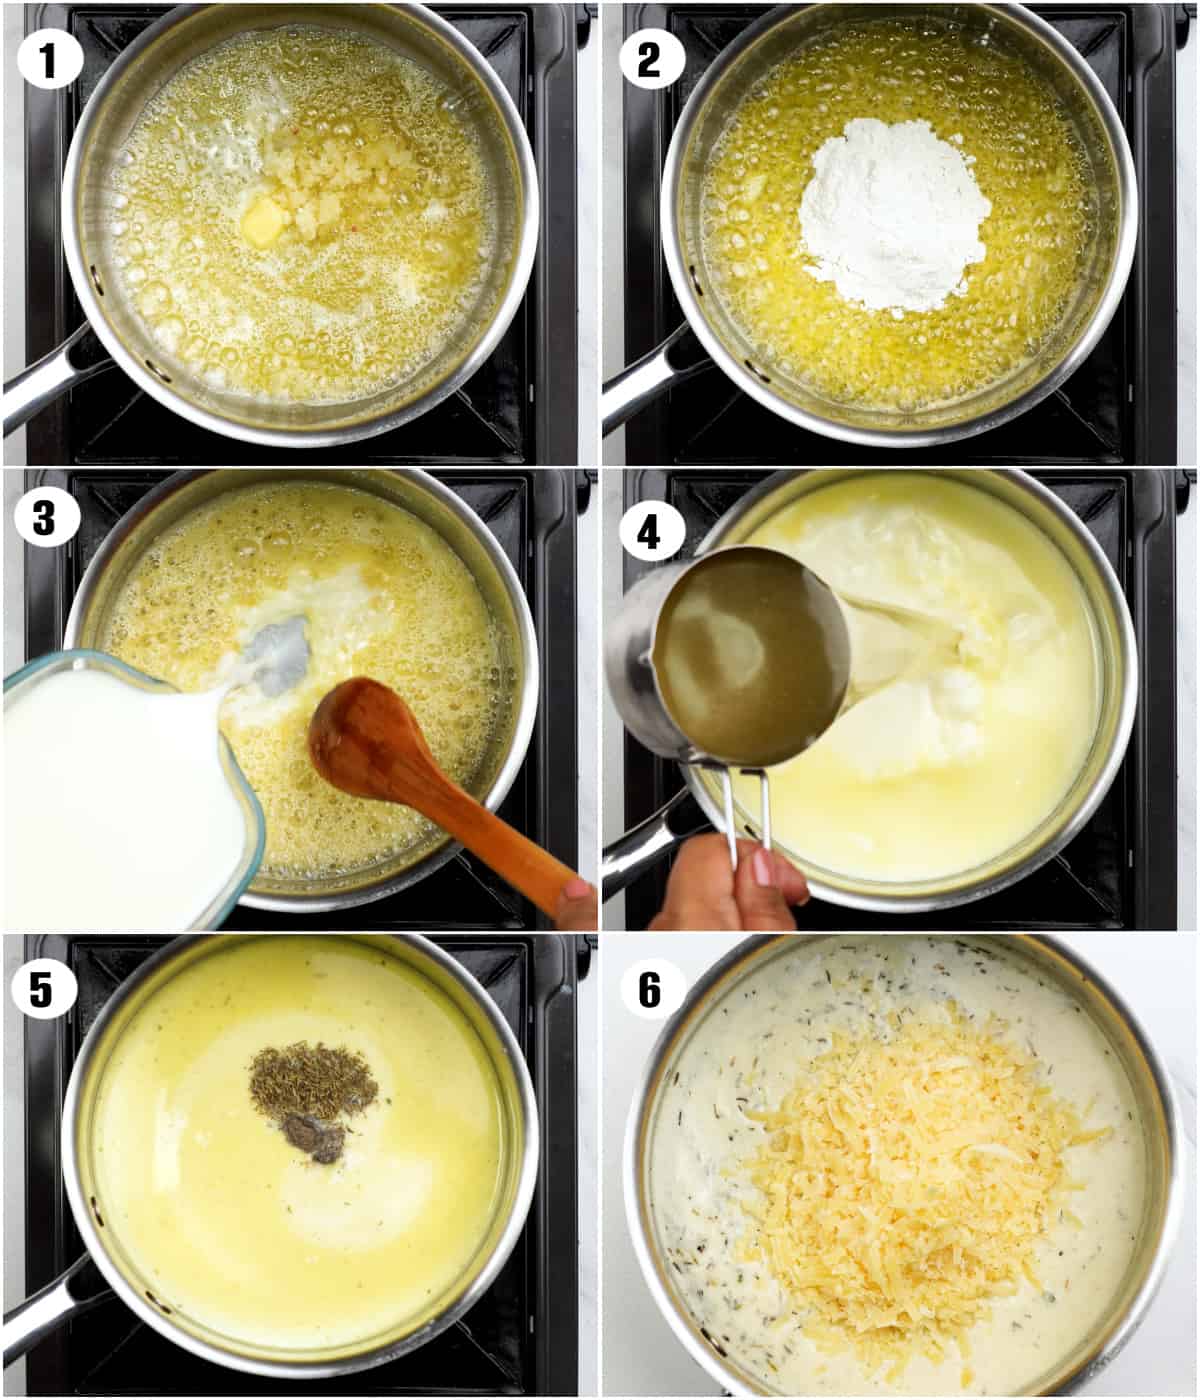 Collage of six images depicting steps to make the creamy and cheesy sauce for scalloped potatoes.